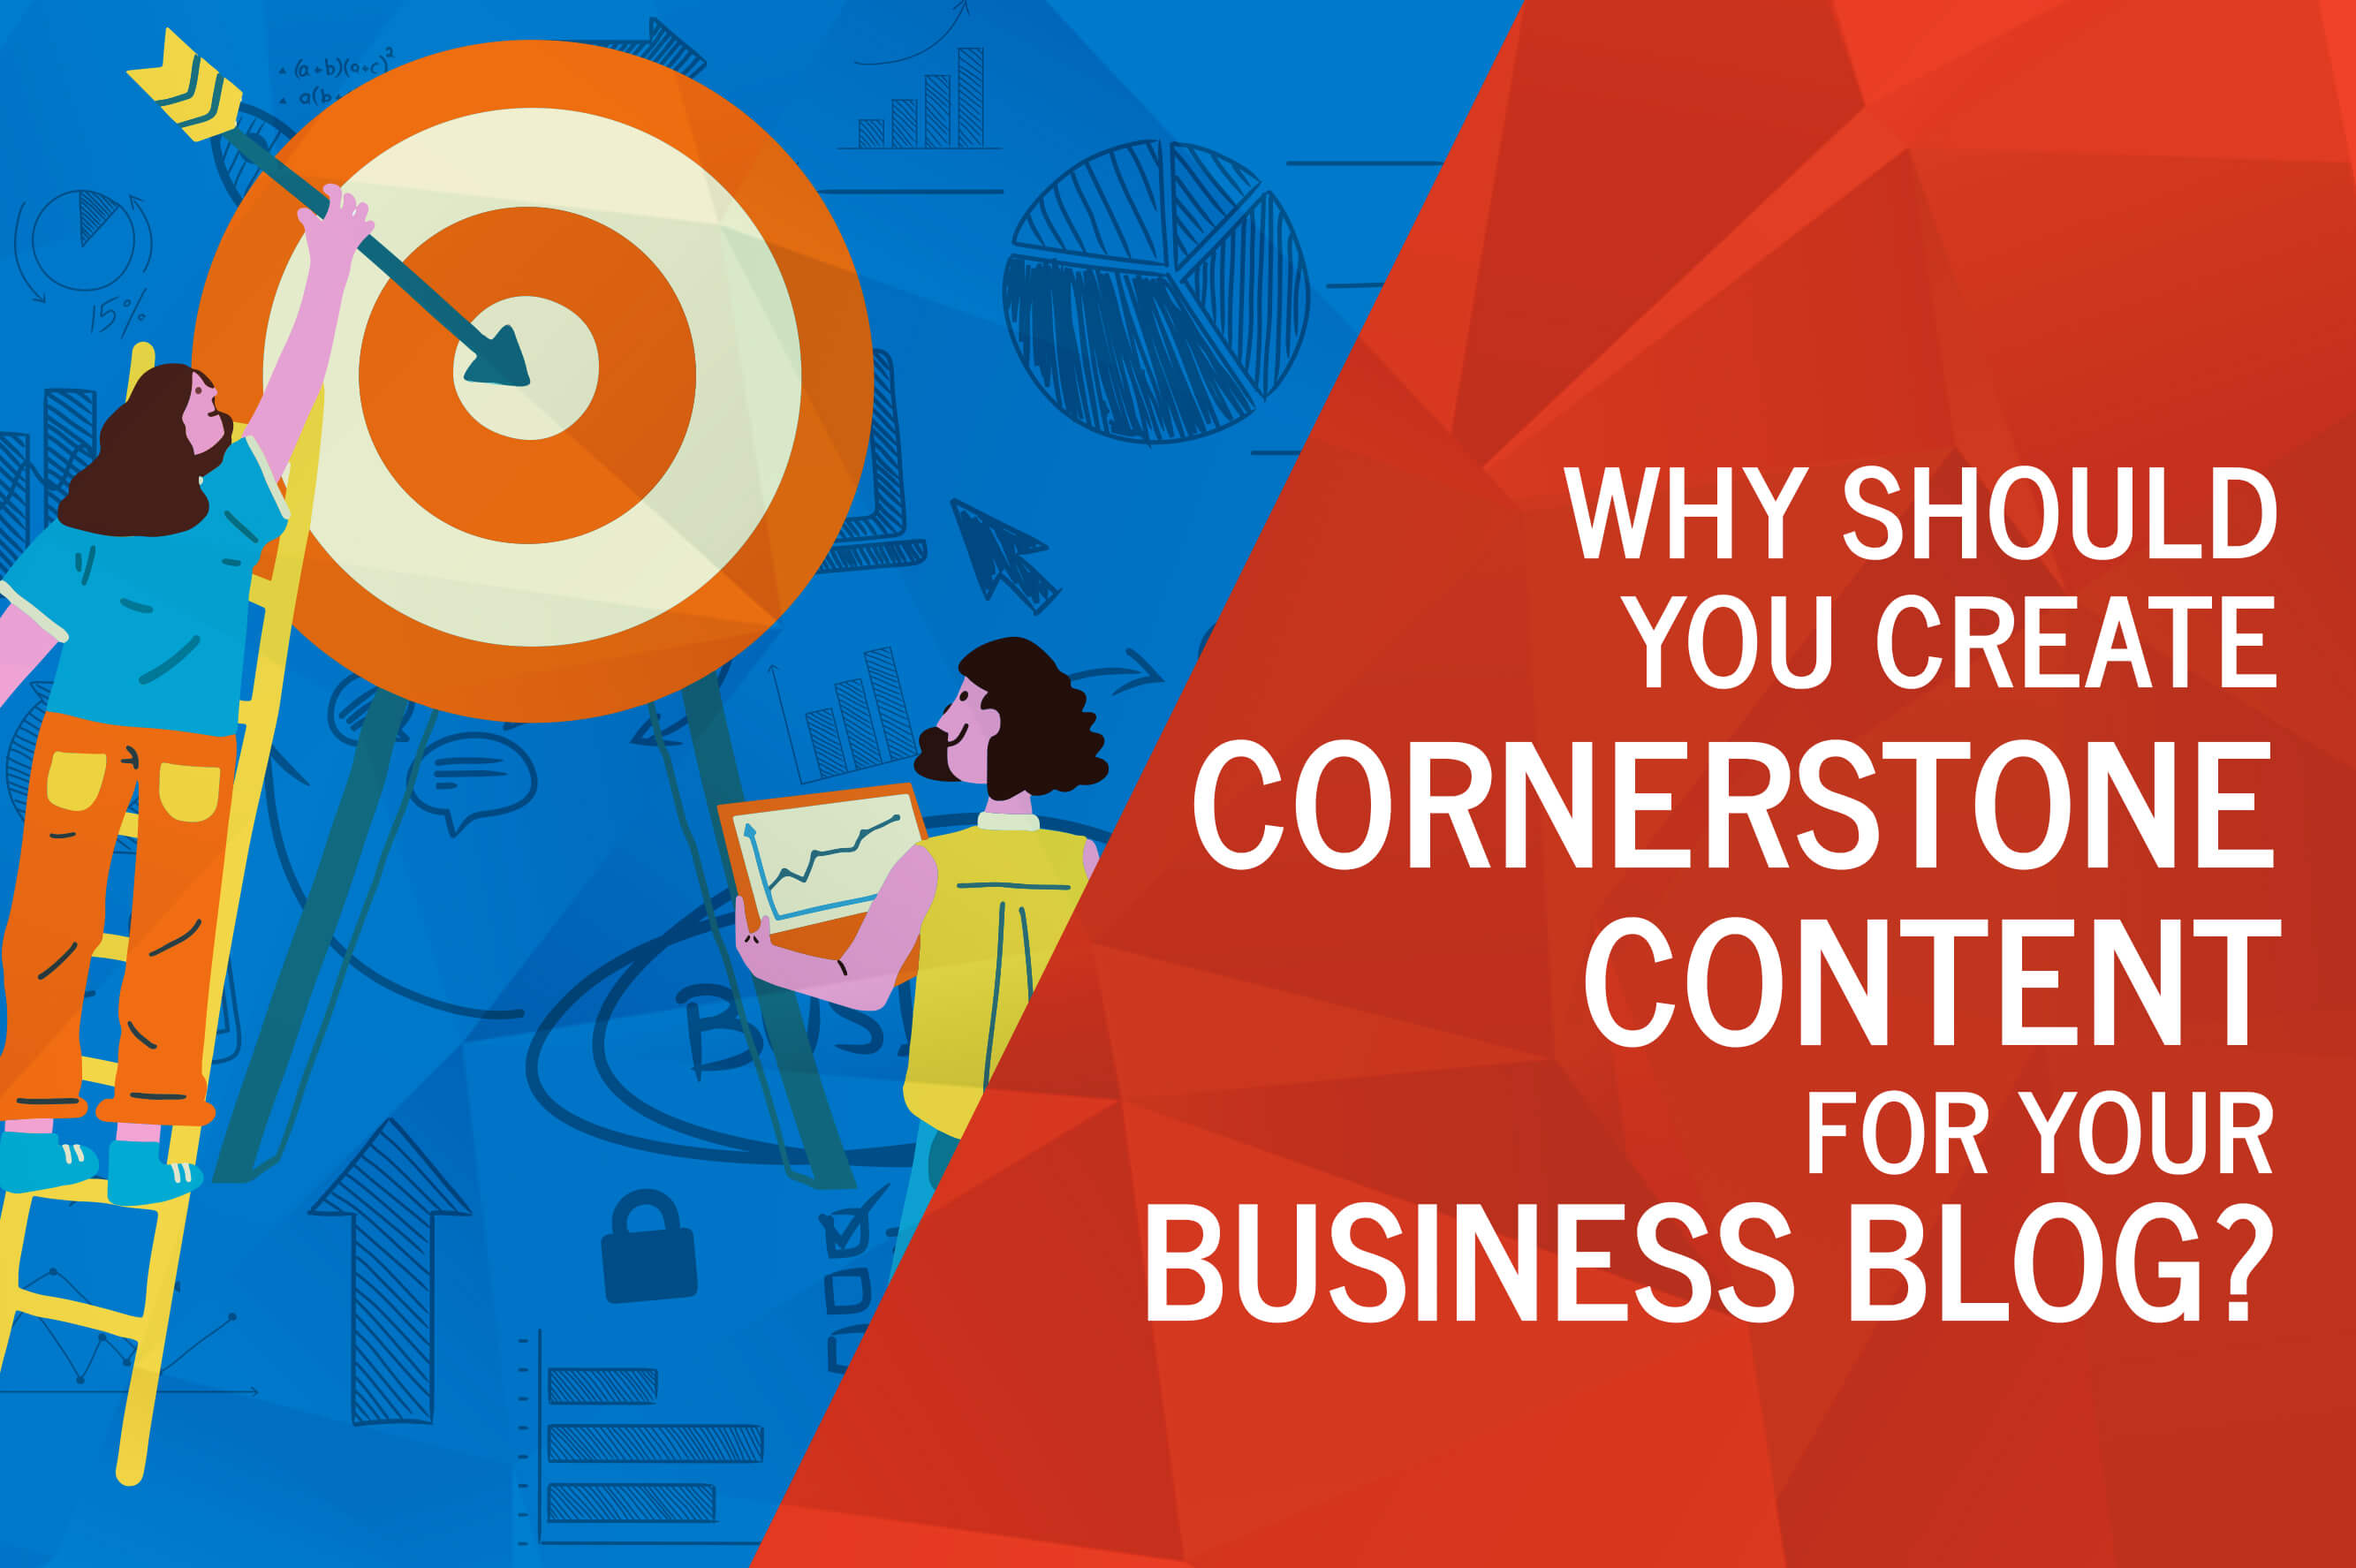 Why Should You Create Cornerstone Content for Your Business Blog